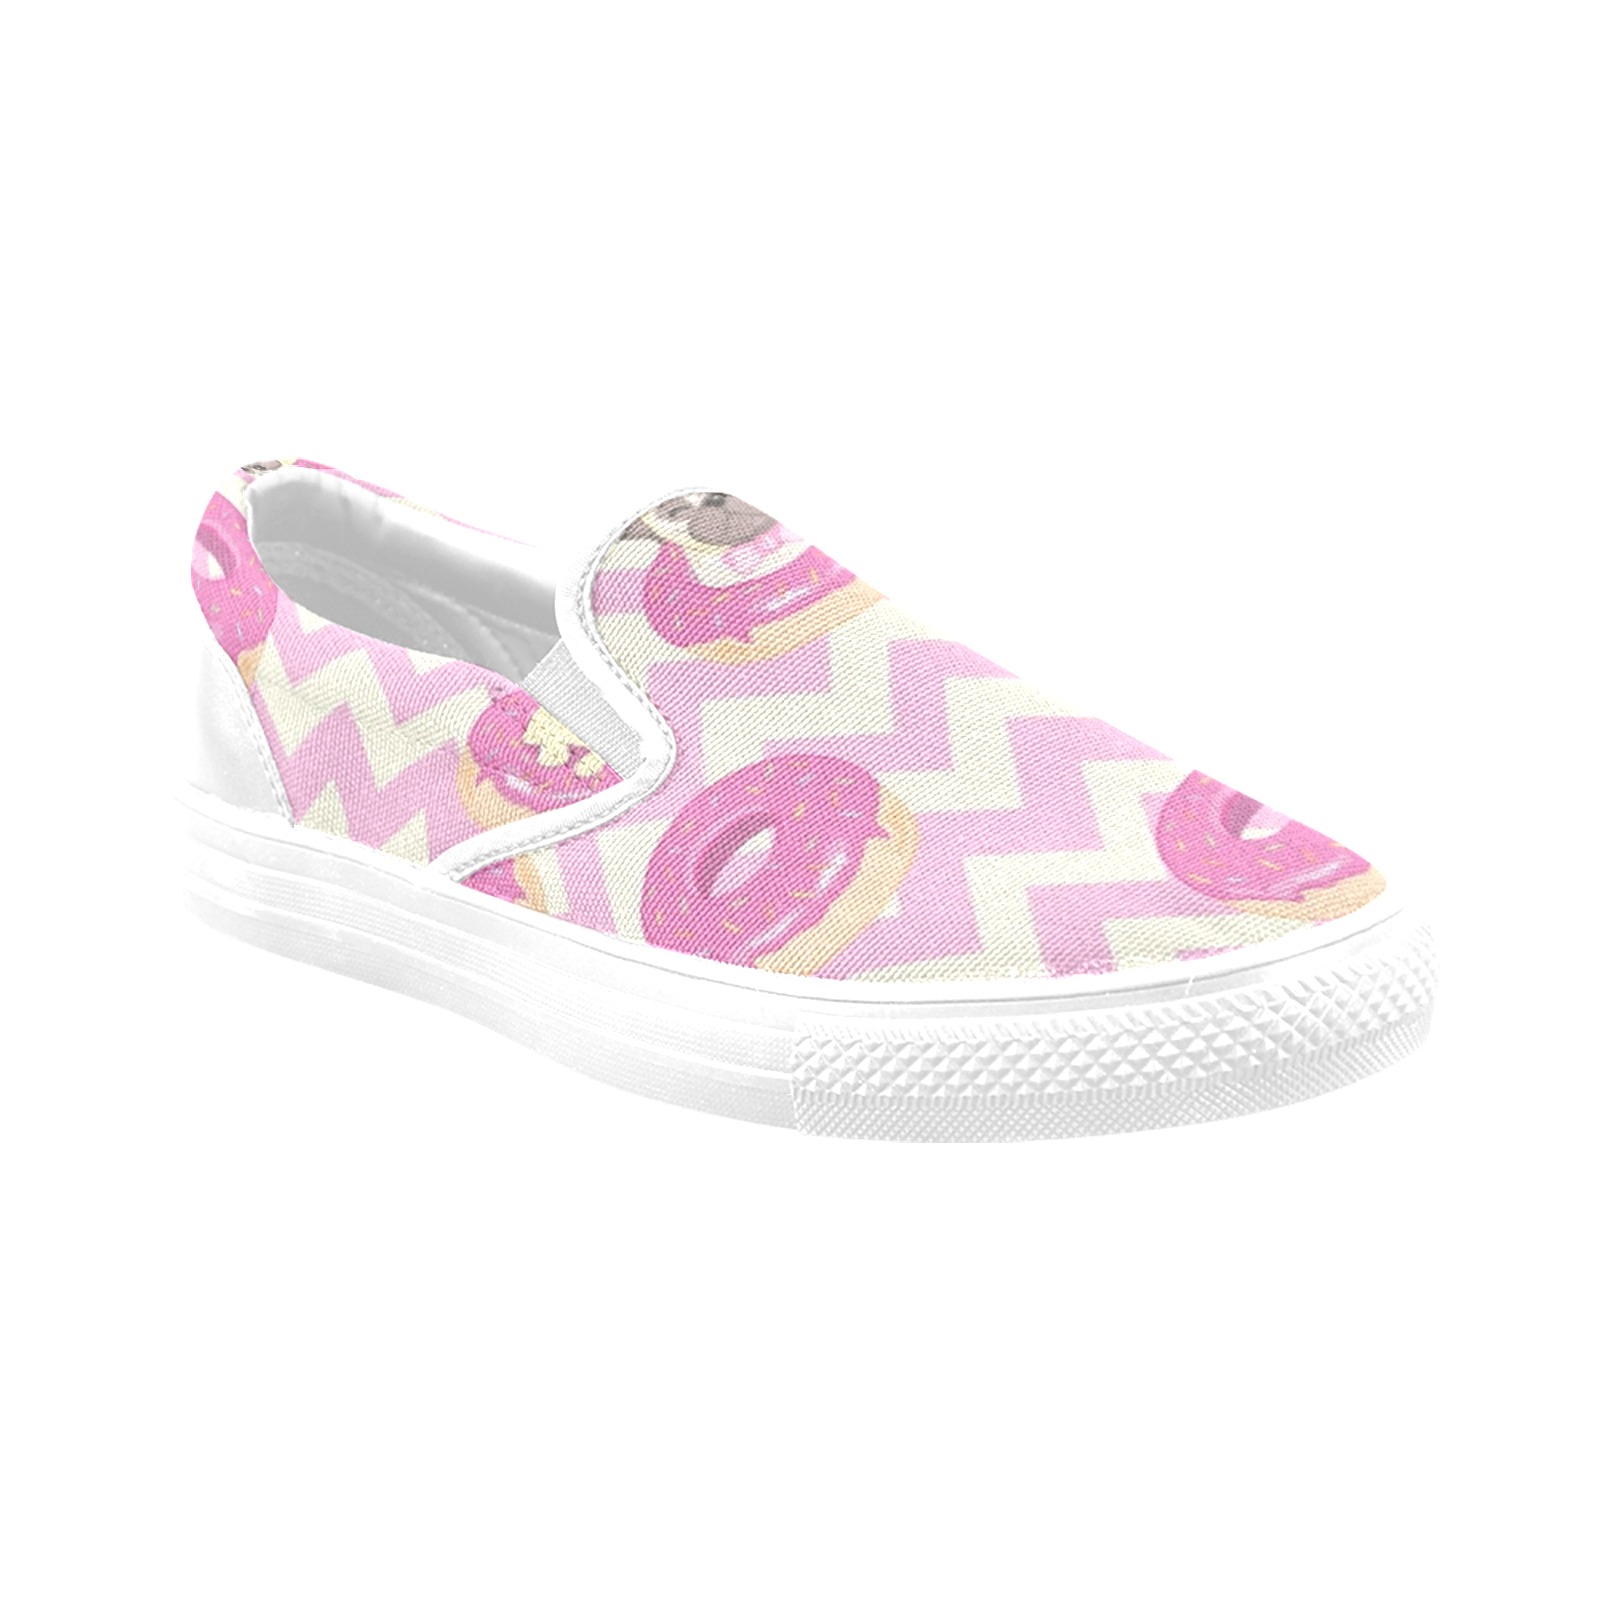 Pugs and Donuts on Pink Chevron Women's Unusual Slip-on Canvas Shoes (Model 019)